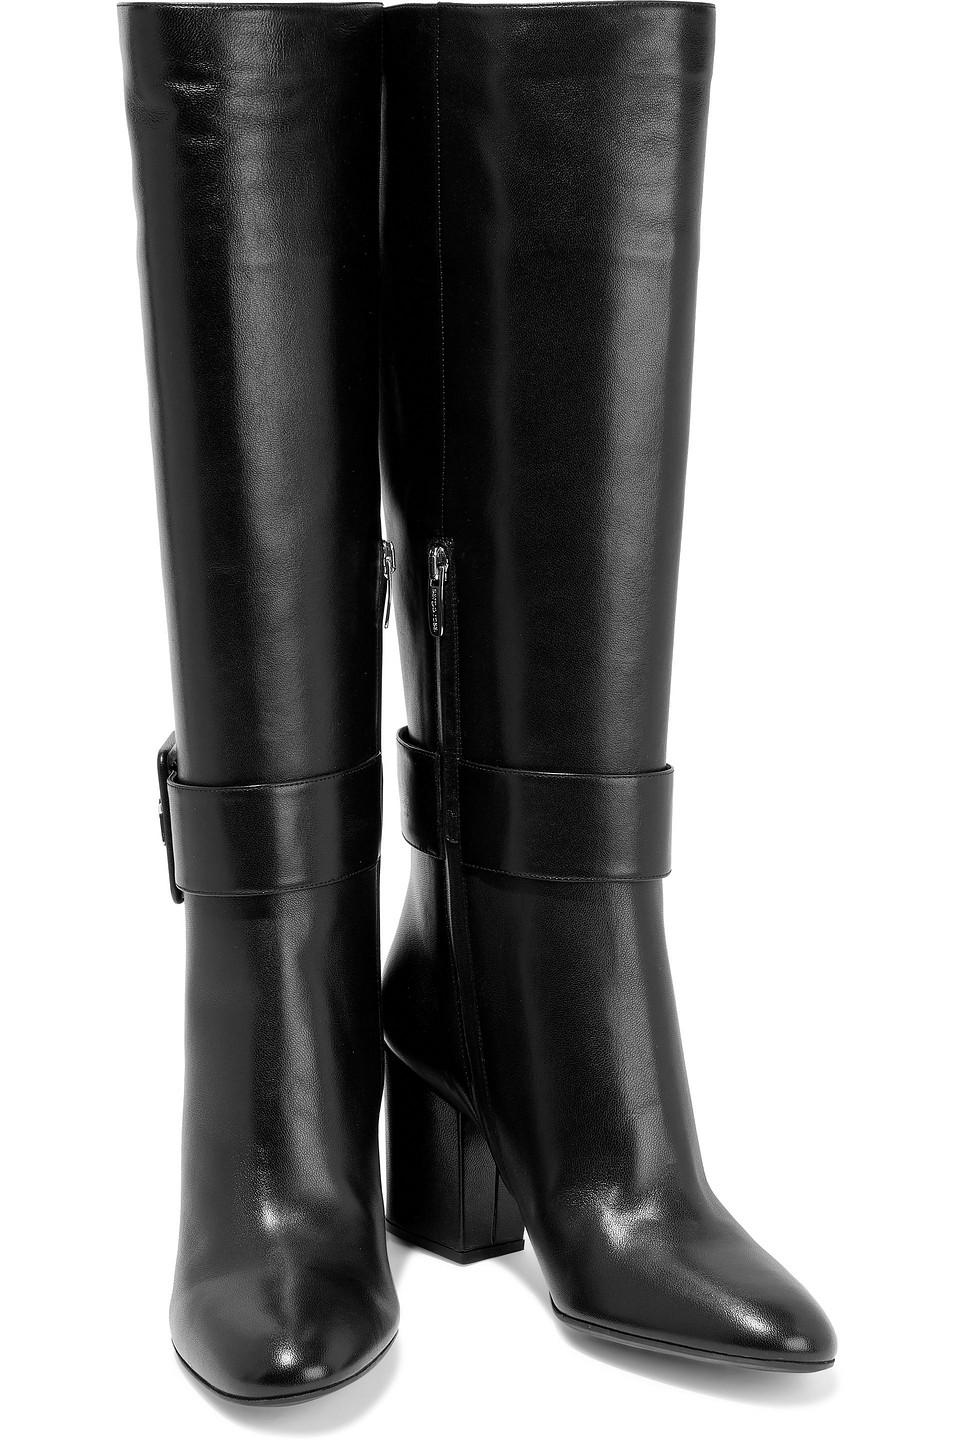 Sergio Rossi Sr Mia 75 Buckled Leather Knee Boots in Black - Lyst